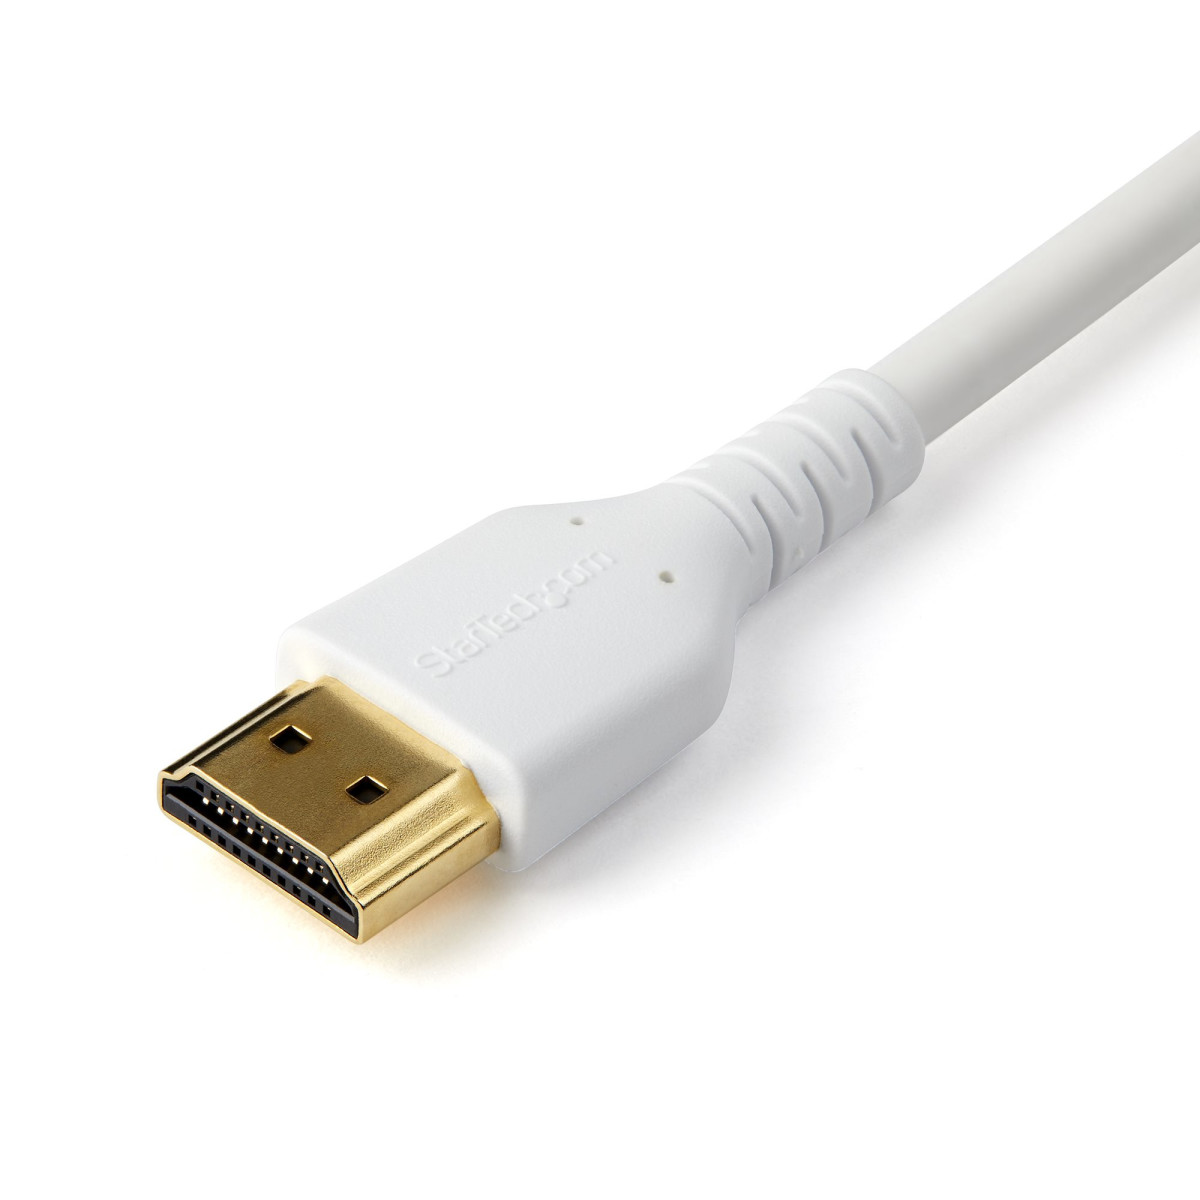 Cable - White High Speed HDMI Cable 2m